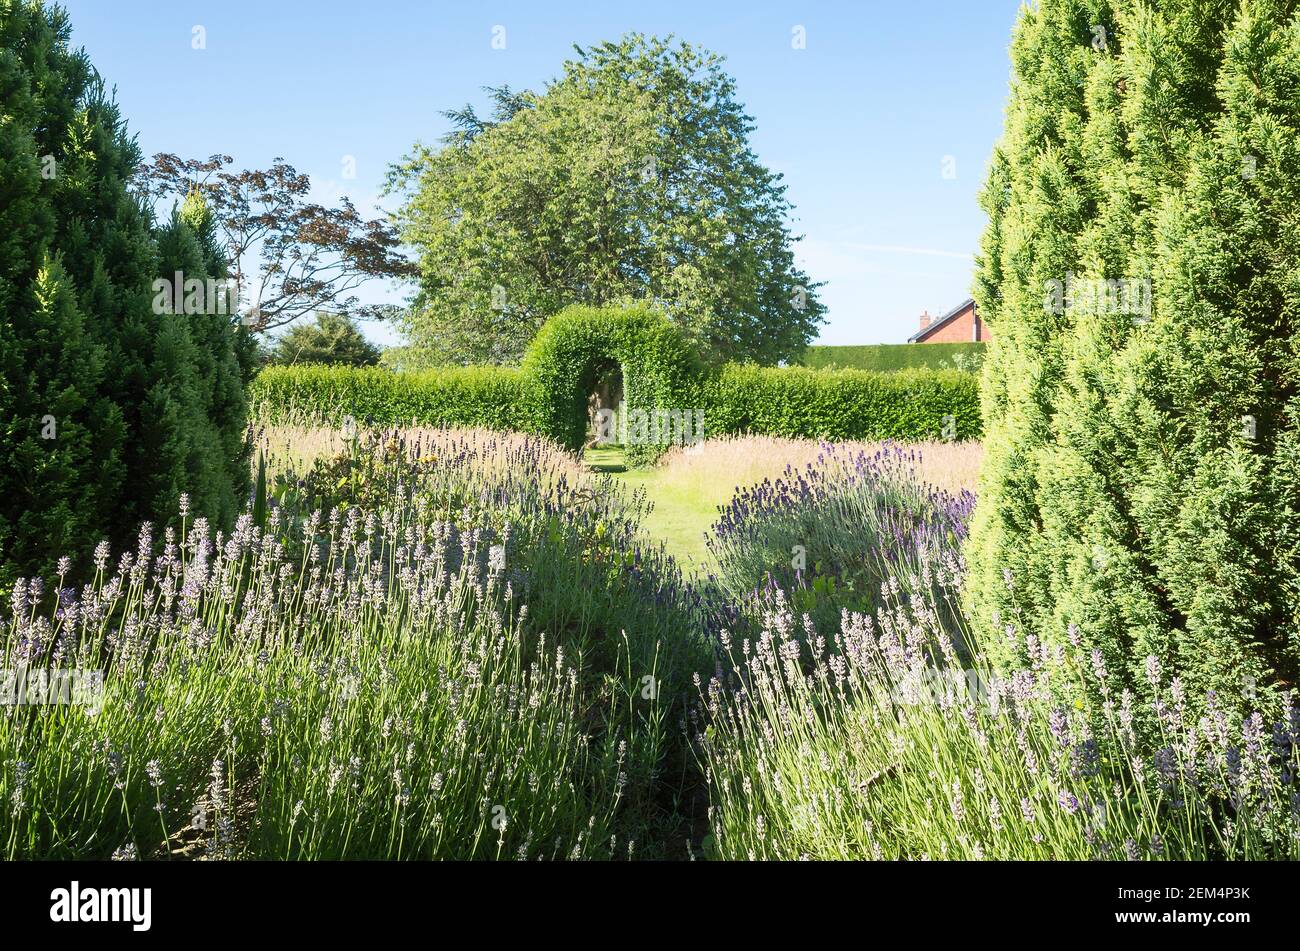 An old lavender bed still provides fragrance in this secluded corner of an English garden Stock Photo